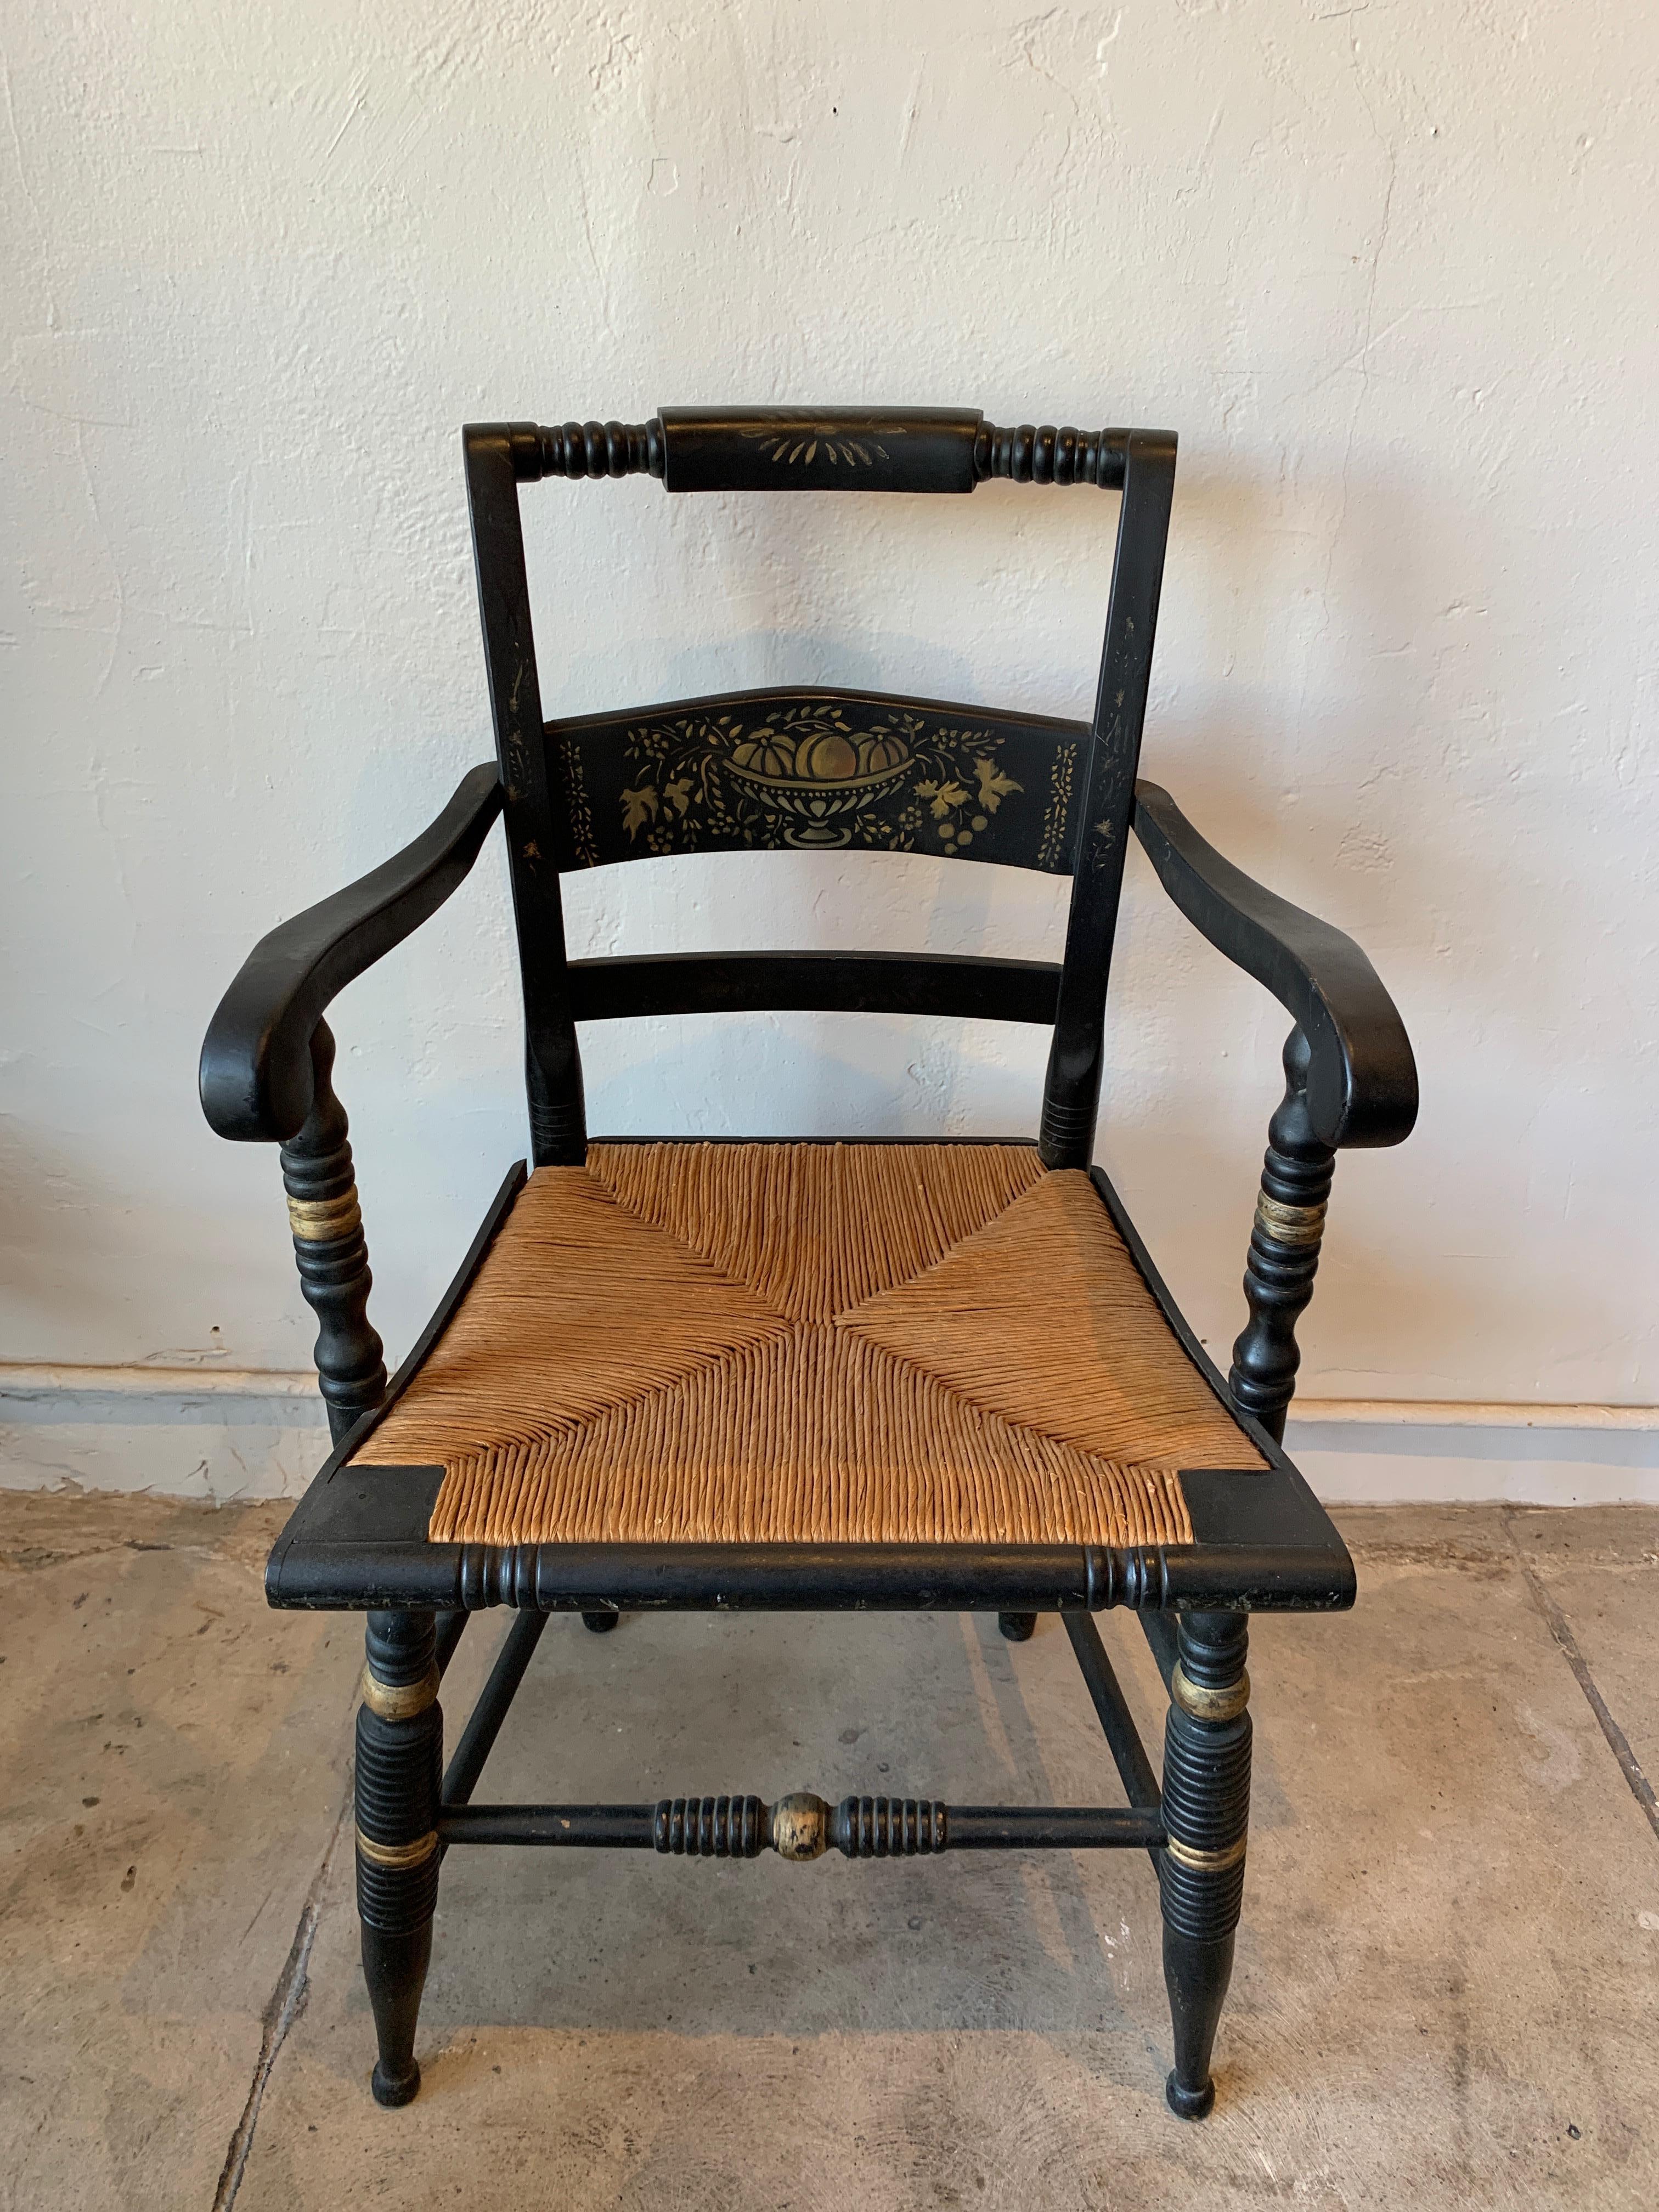 Set of five Hitchcock chairs, one armchair. Each chair has it's original rattan seat and is painted with gold motifs. A beautiful dining set with the armchair at the head of the table.